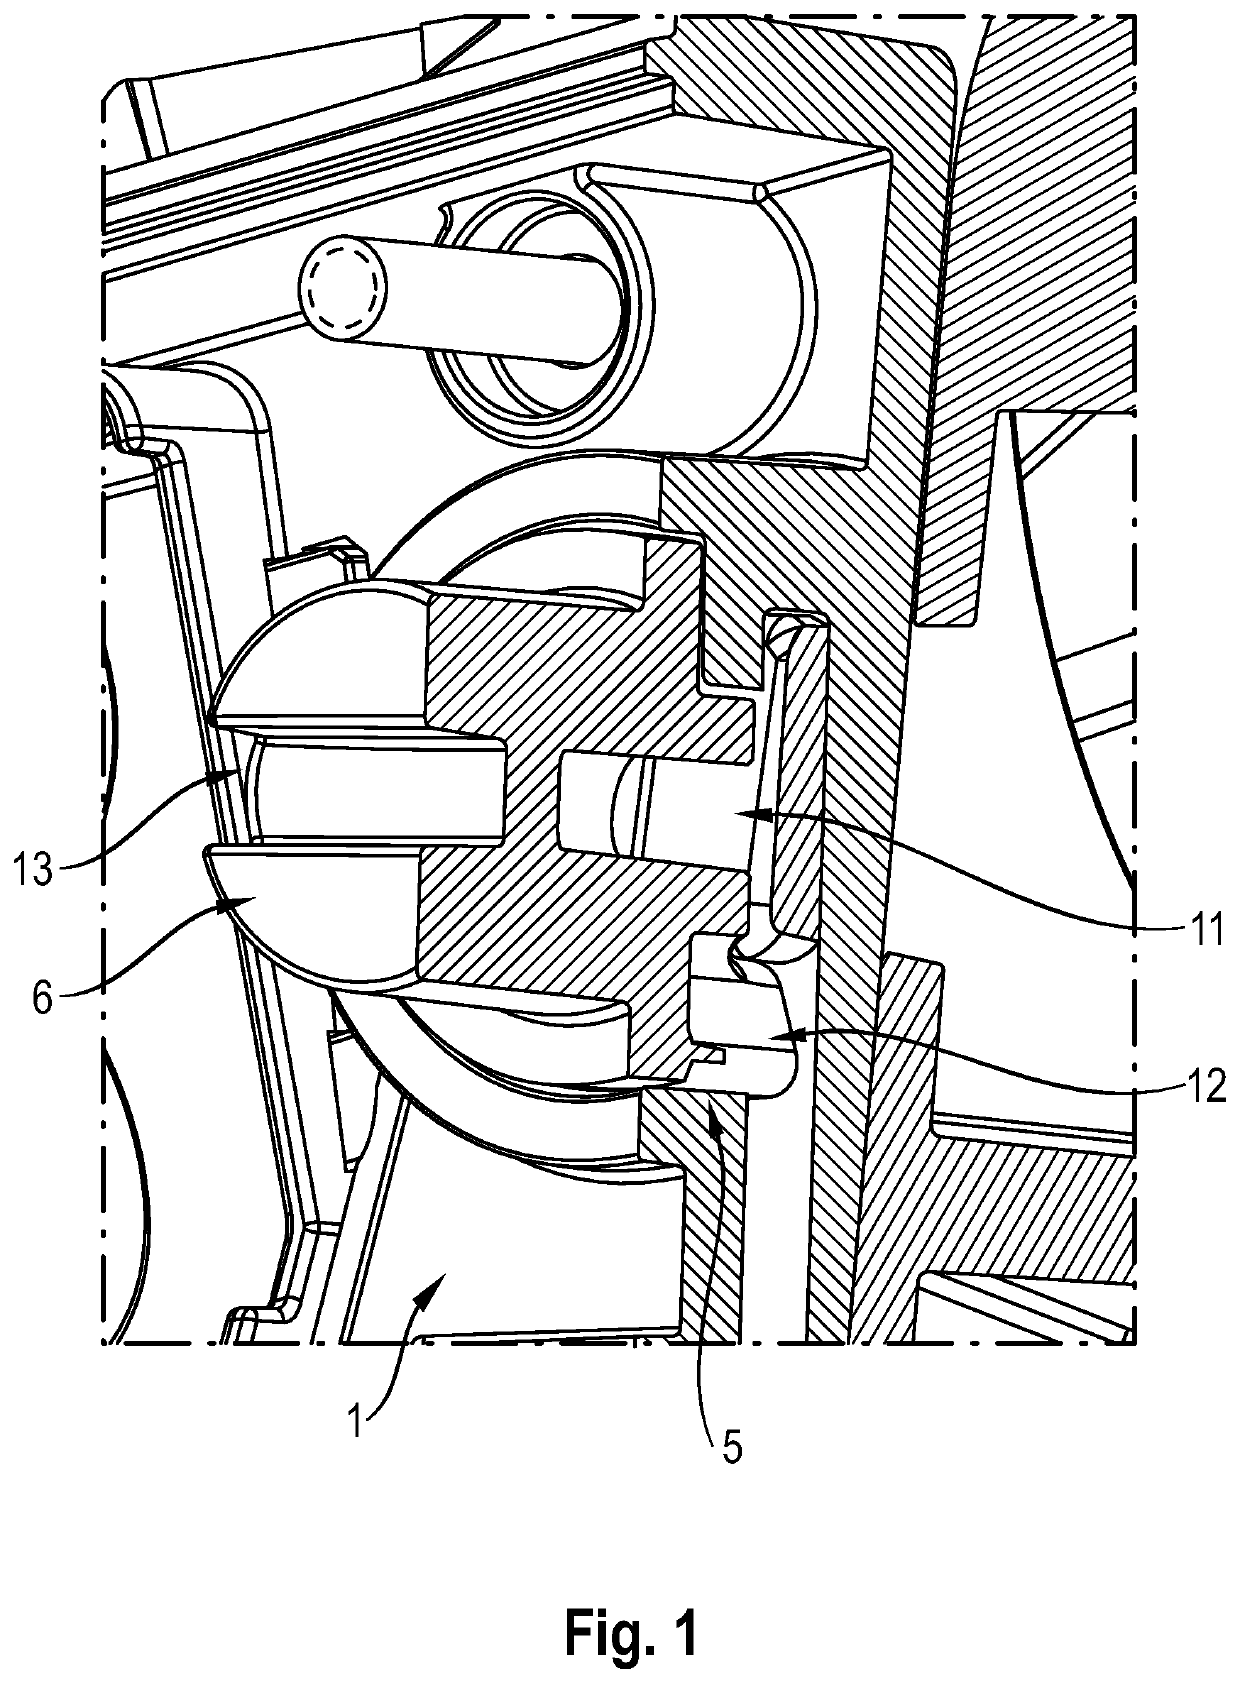 Apparatus for receiving a functional unit for a power tool and method for fastening a receiving apparatus of this kind to a power tool